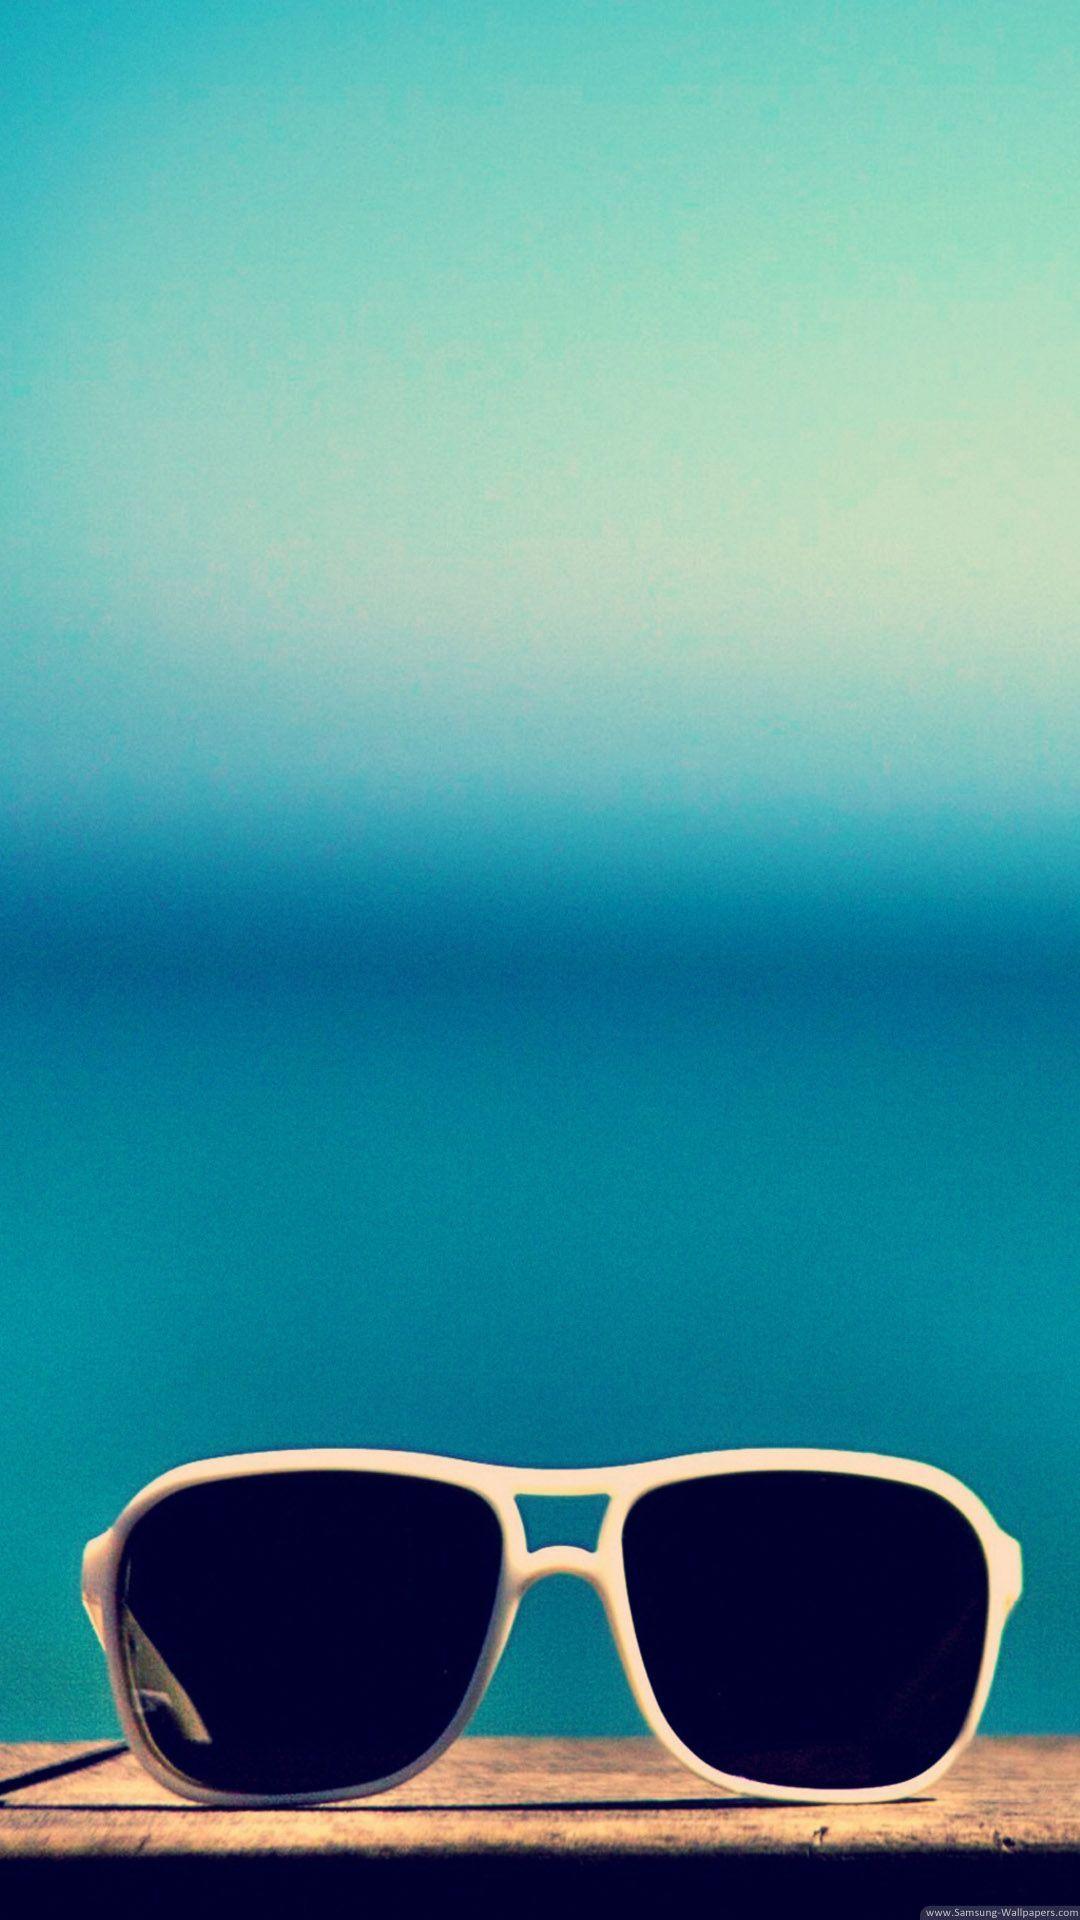 wallpaper for iPhone, Android. Wallpaper. Wallpaper